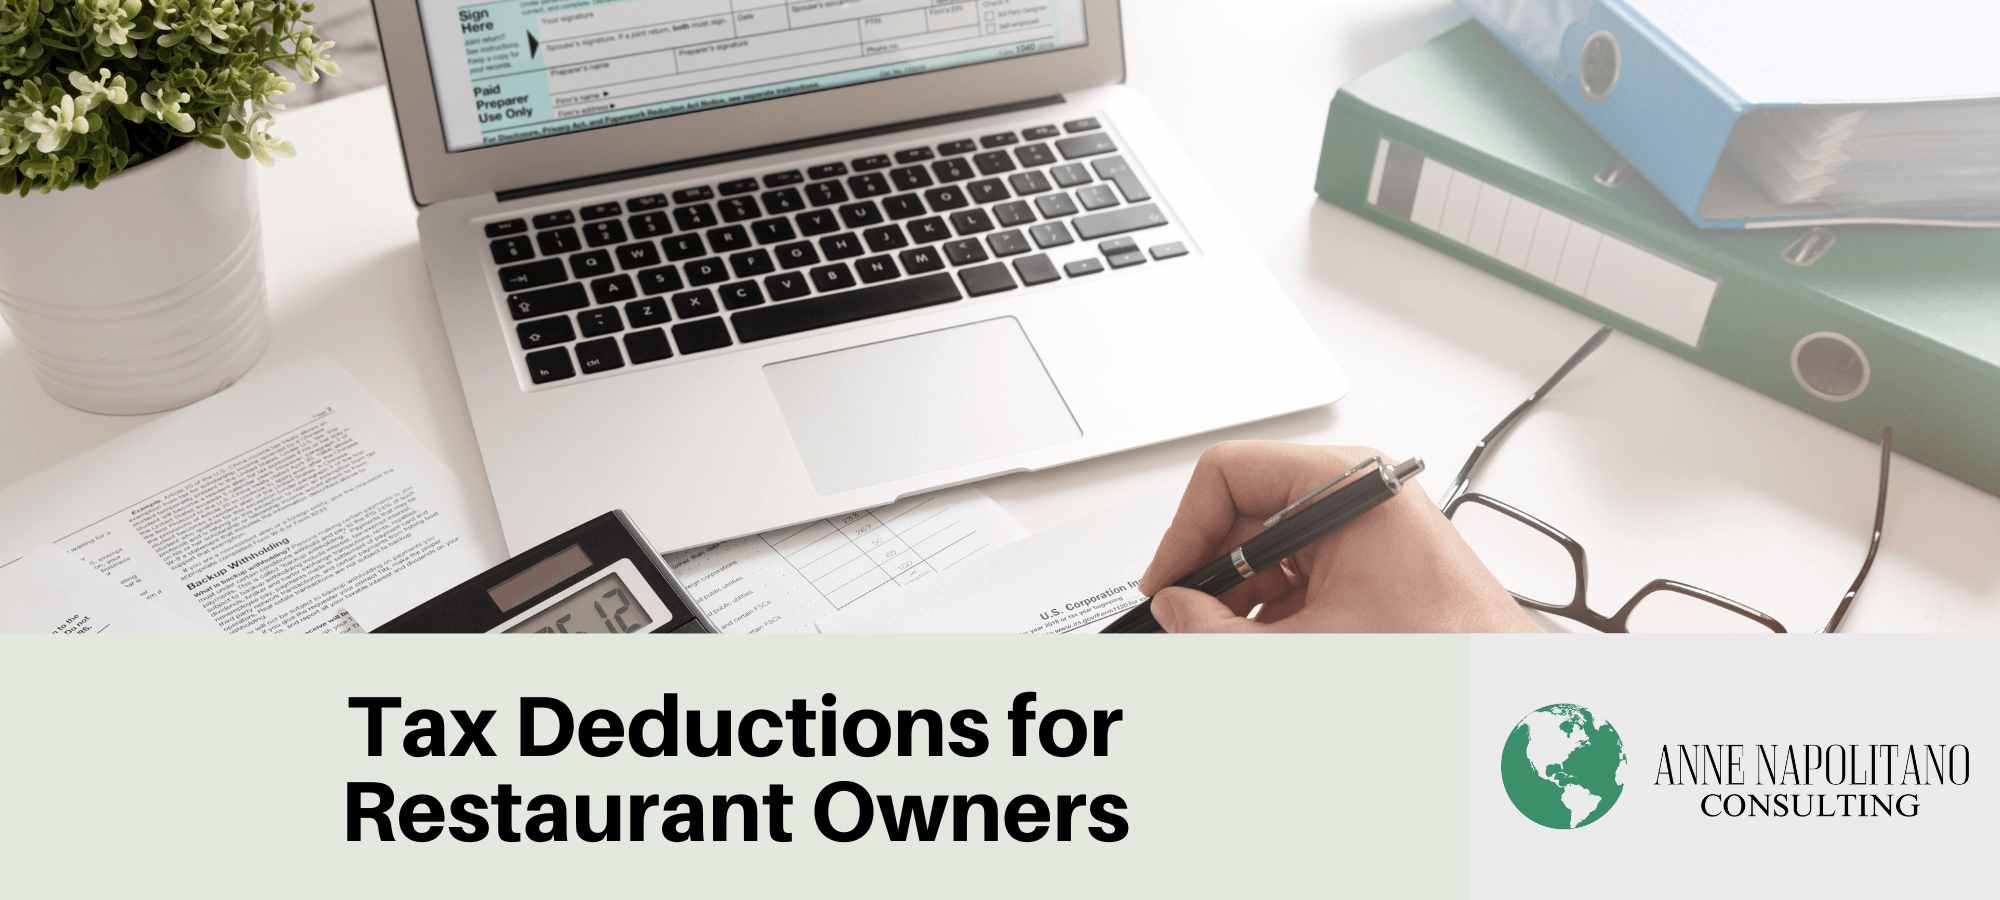 Tax deductions for restaurant owners